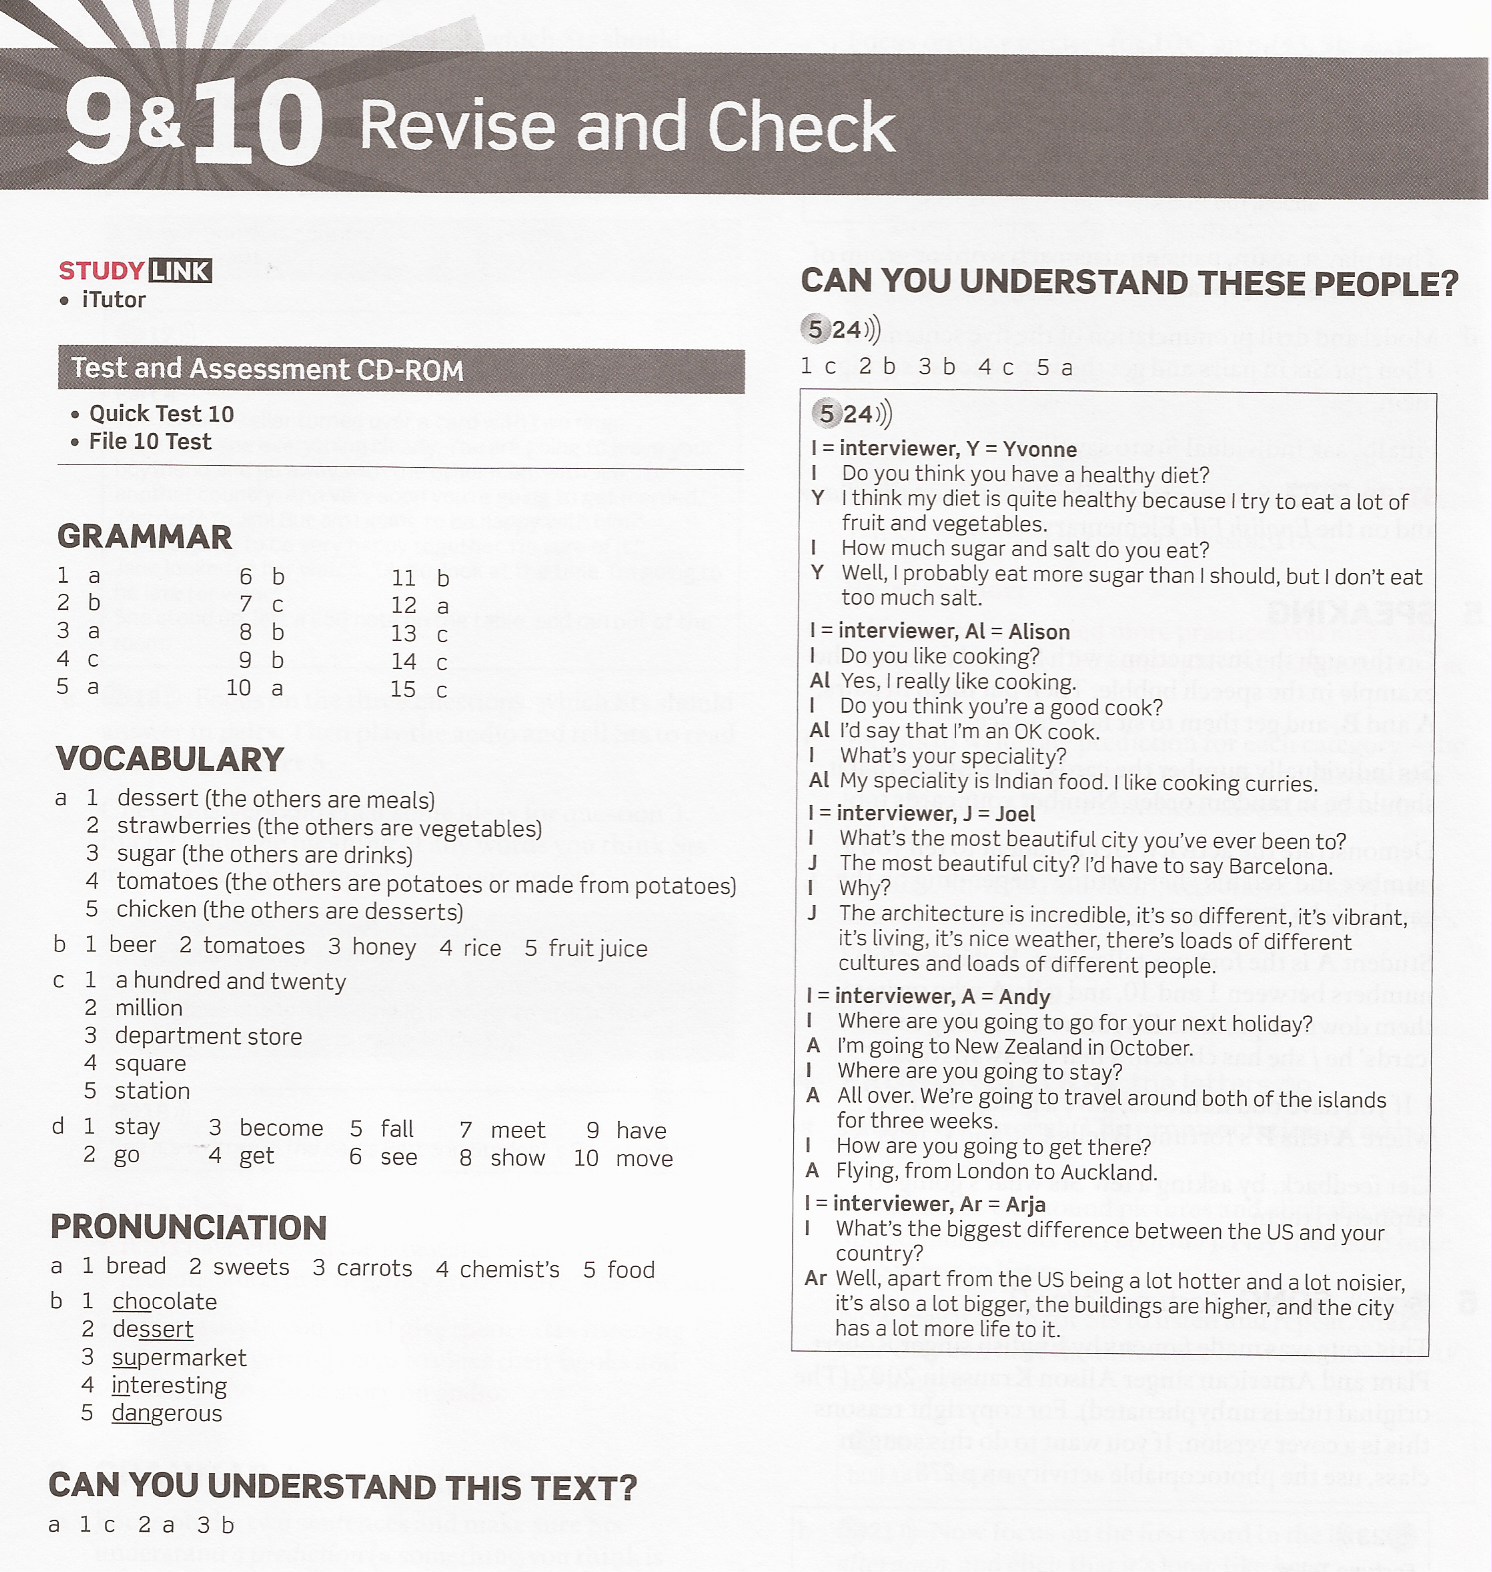 Ff2 unit 9. Revise and check 1 2 ответы Elementary. Revise and check 9 10 pre-Intermediate English file answers. Revise and check 1 2 pre Intermediate. Revise and check 9 10 pre Intermediate Key.